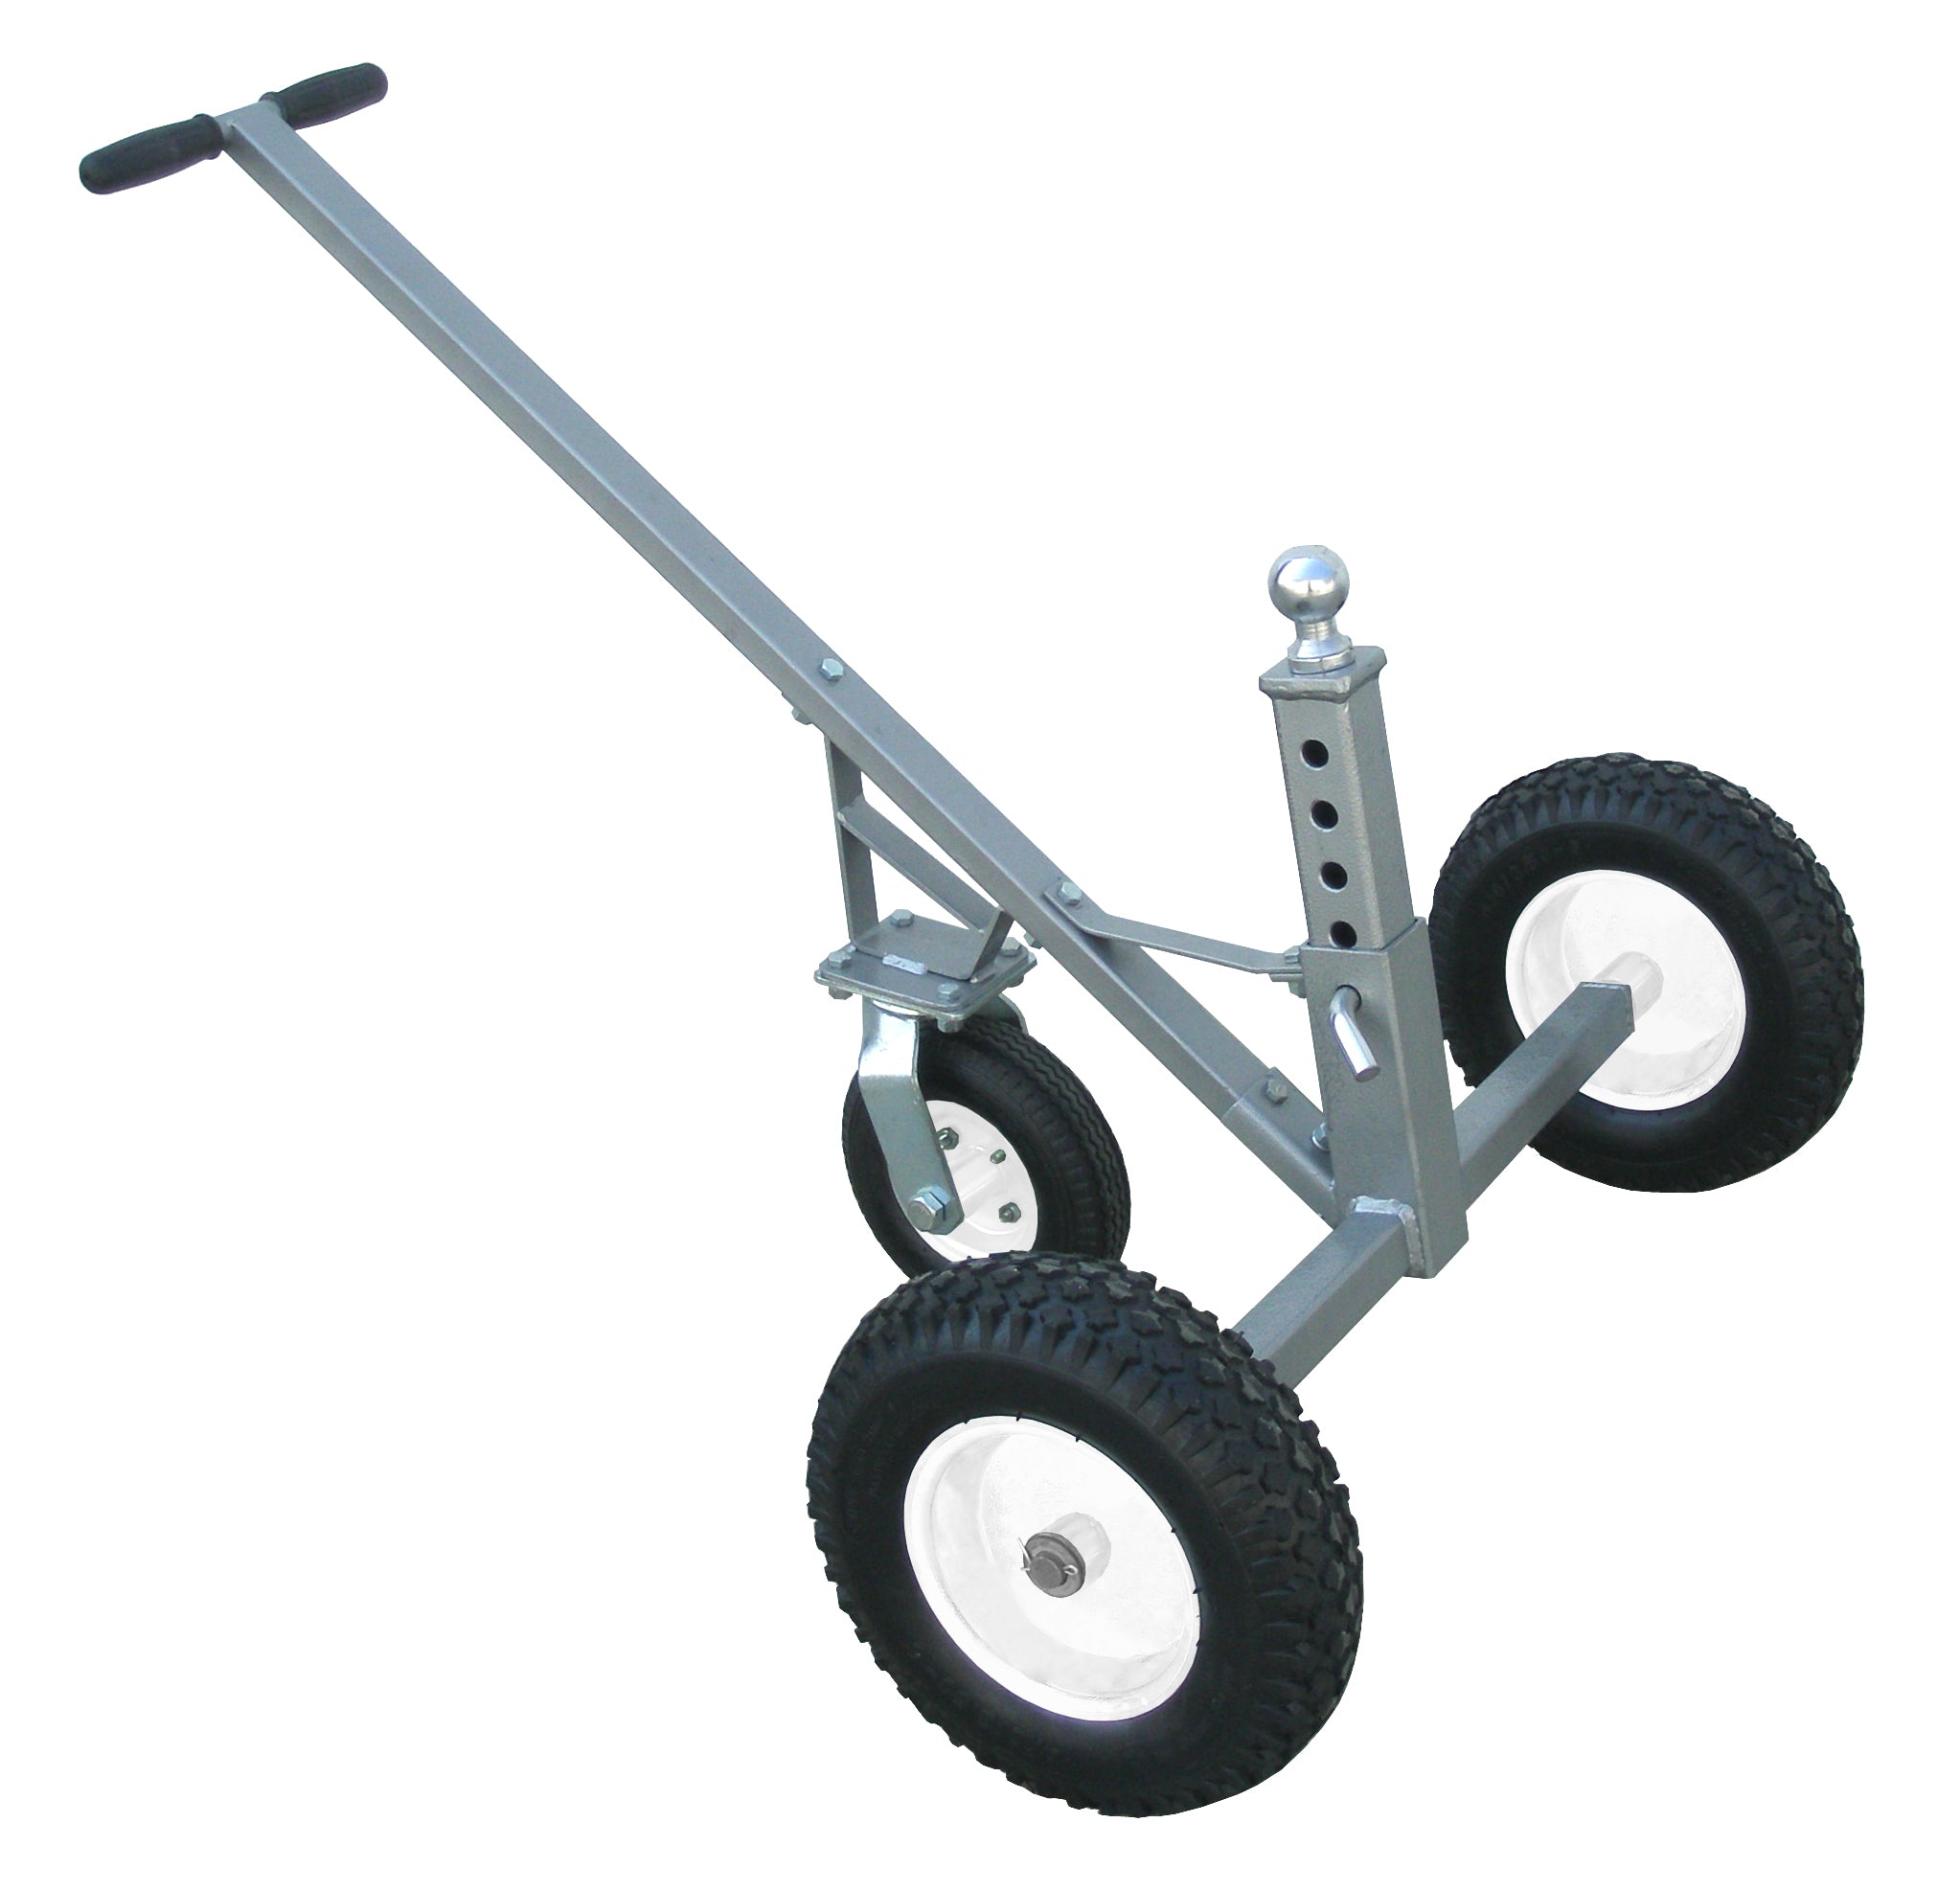 Tow Tuff TMD-800C Adjustable Trailer Dolly with Caster Wheels